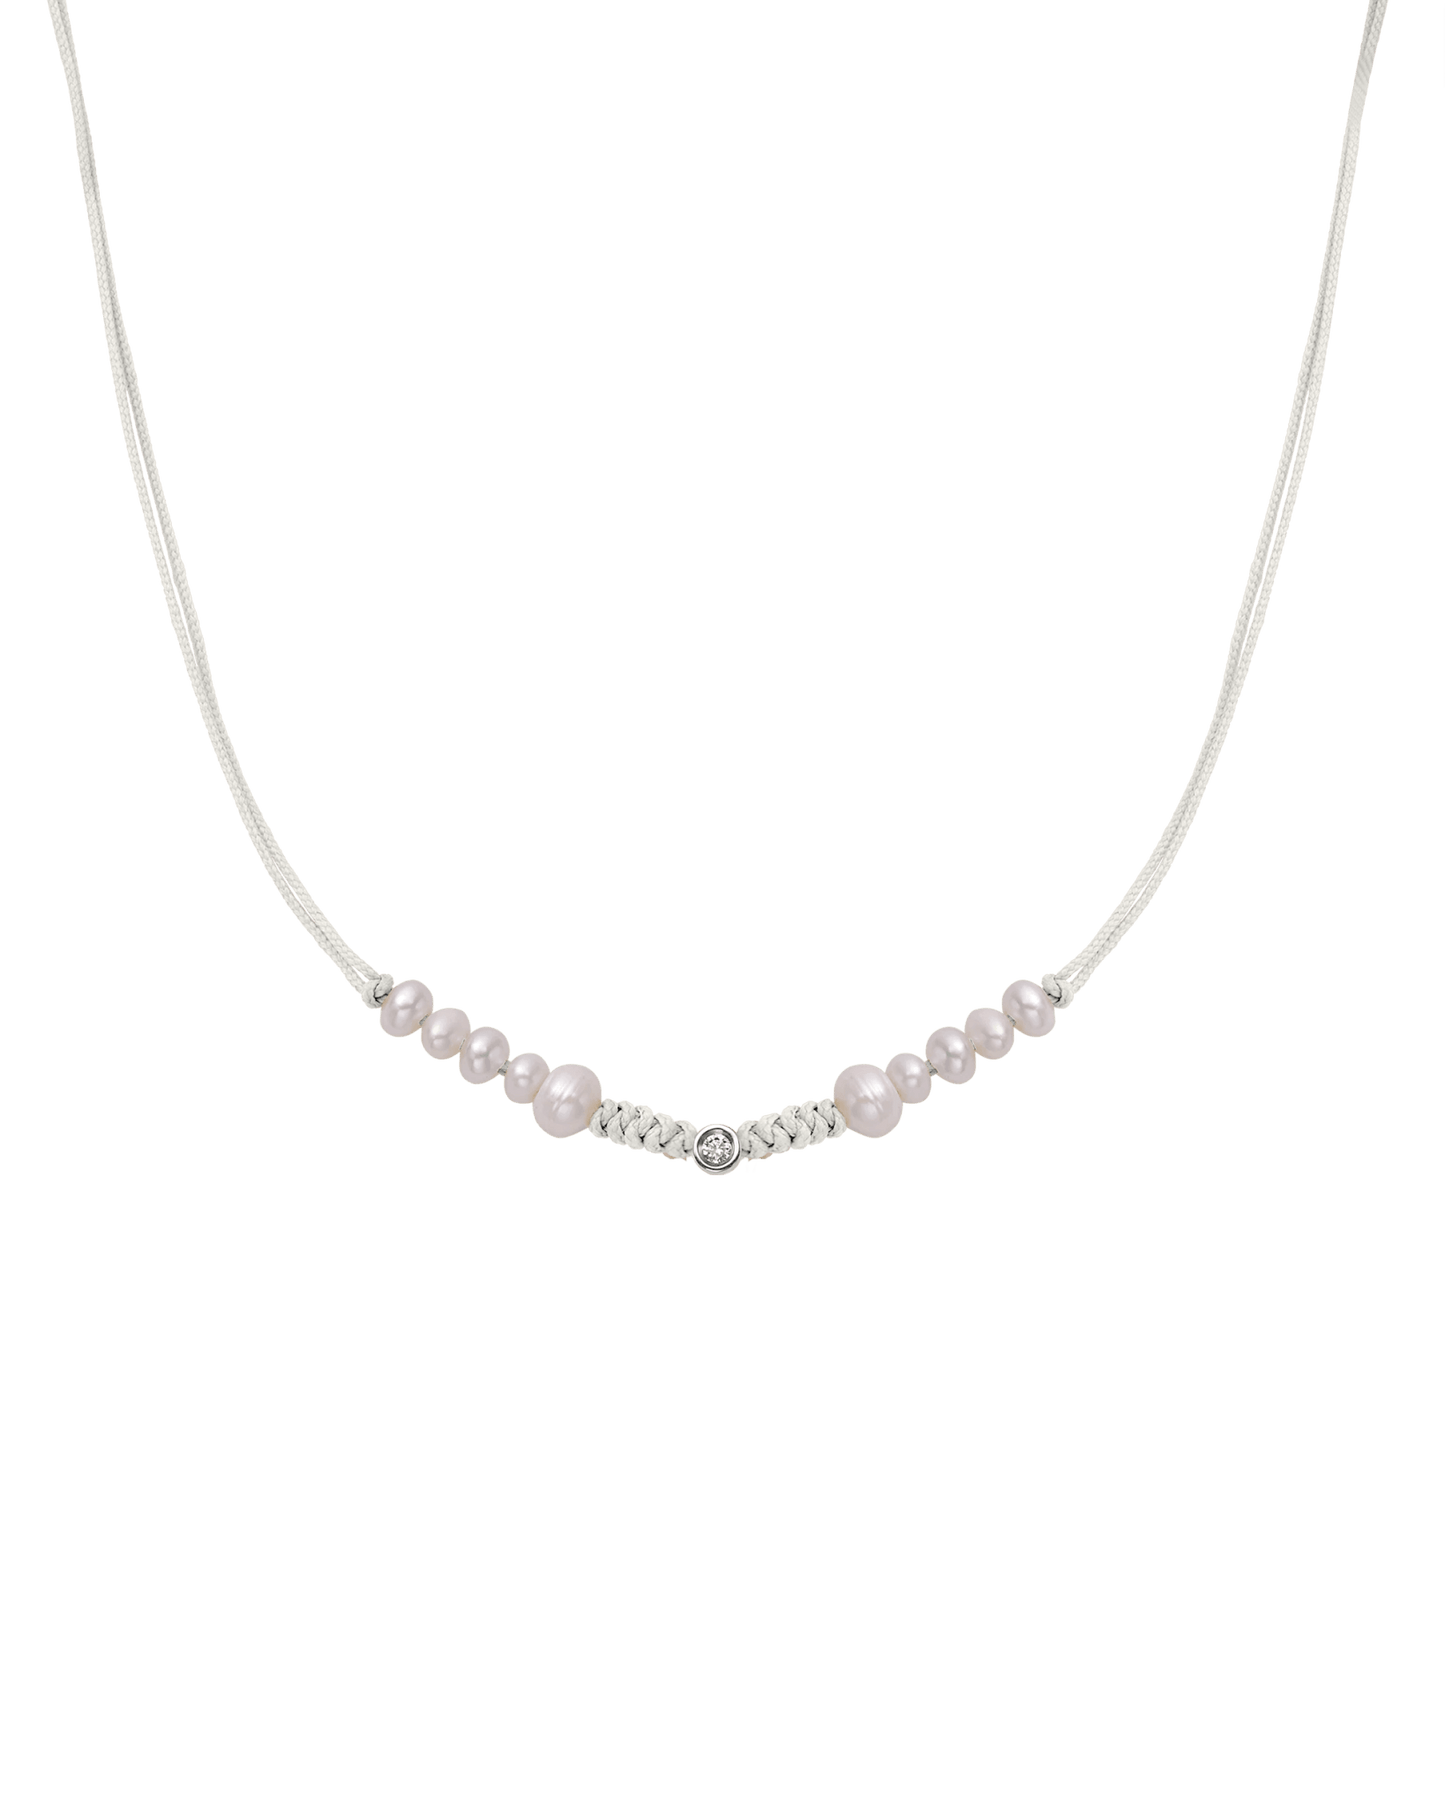 Ten Natural Pearl String of Love Necklace - 14K White Gold Necklaces 14K Solid Gold Pearl Small: 0.03ct 